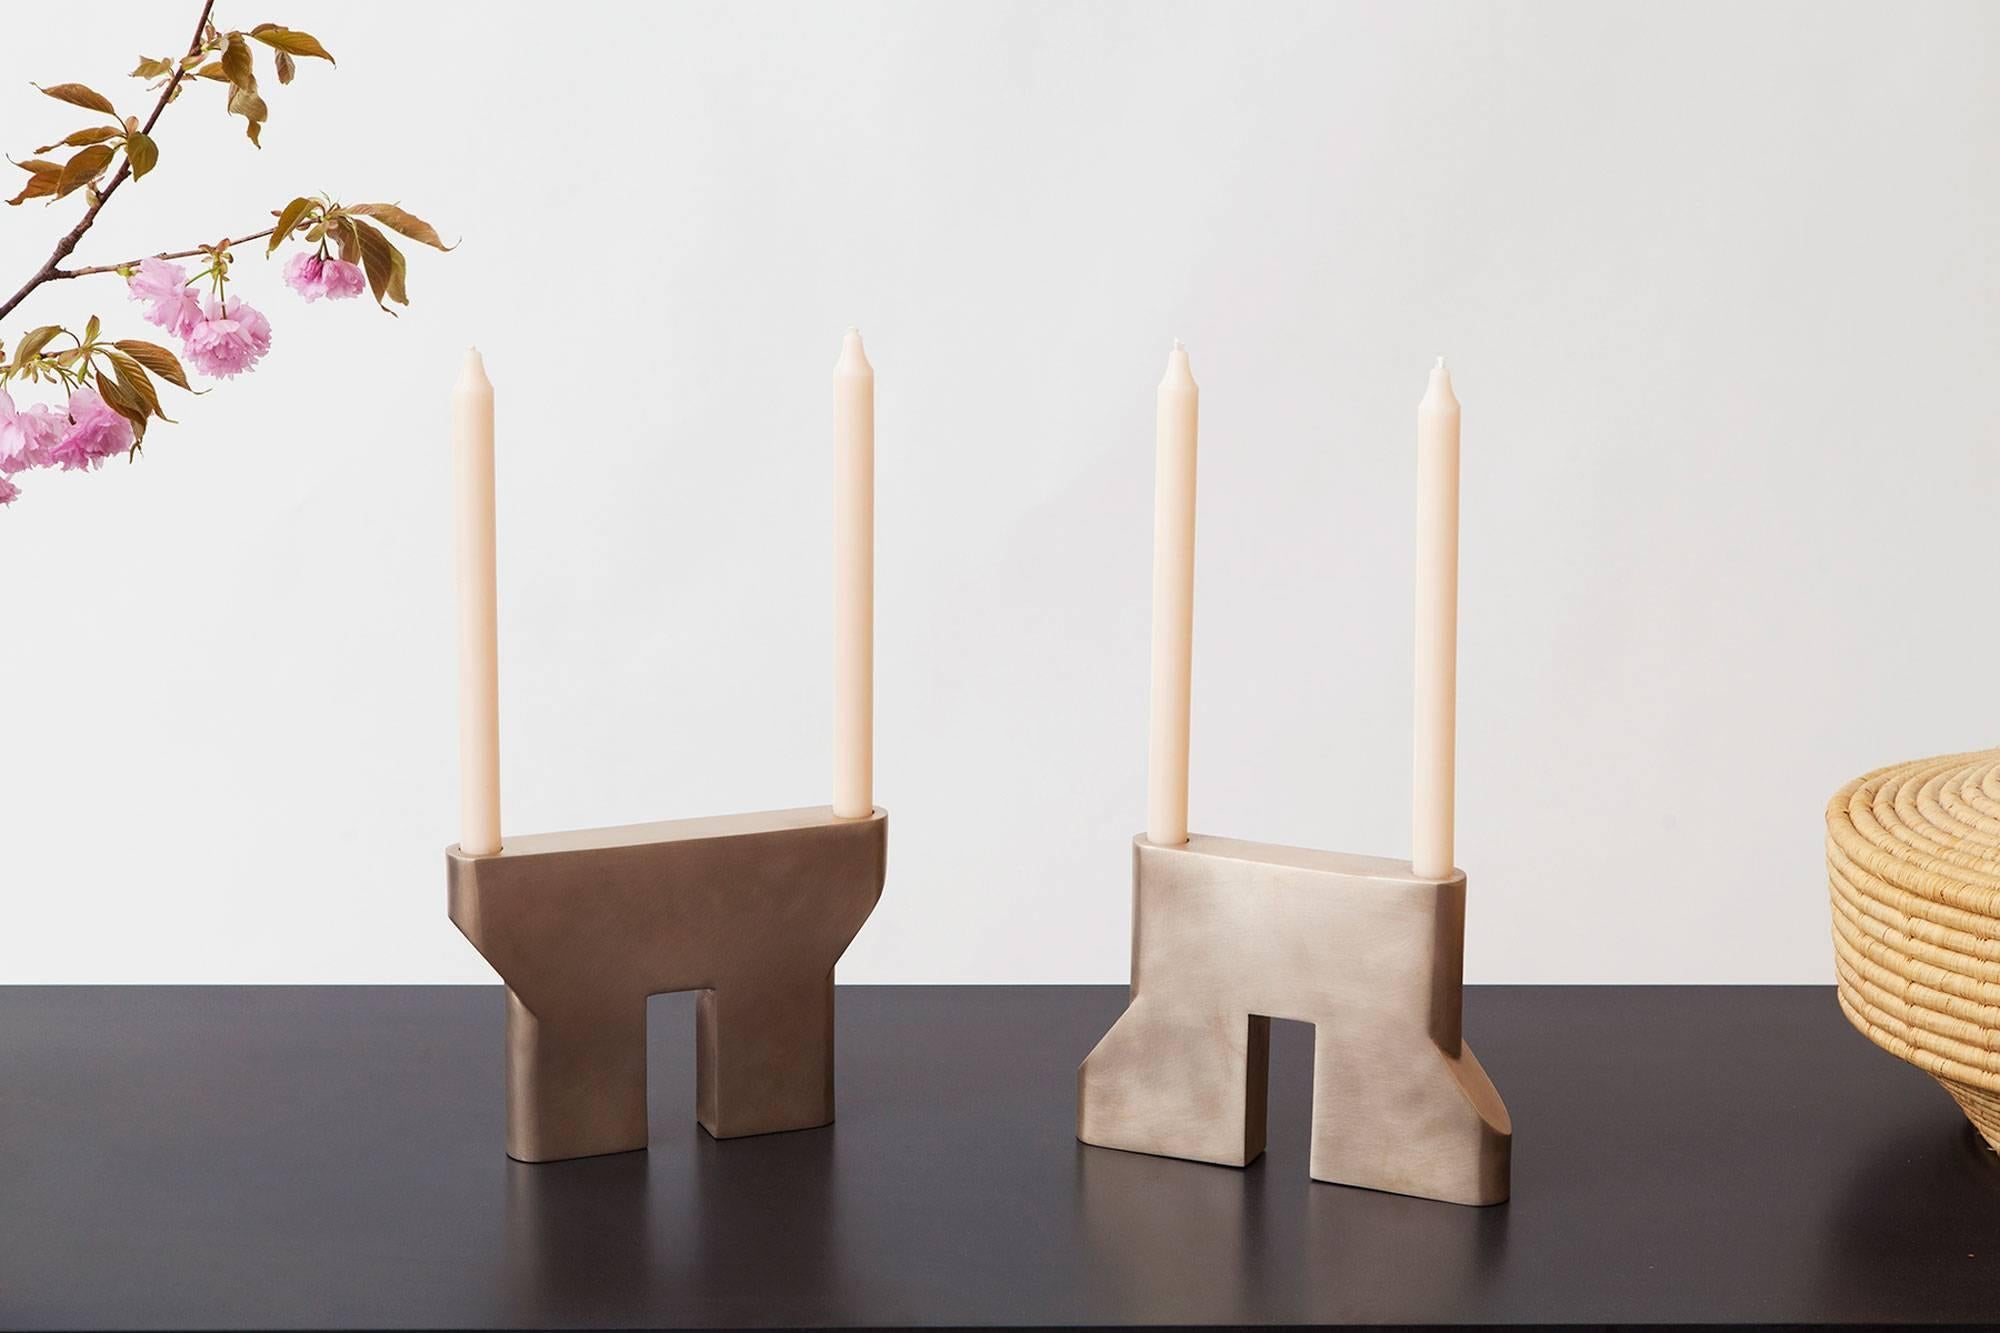 Not So General Gallery in Los Angeles is proud to present the Dune candelabra in bronze from Brooklyn-based design studio Vonnegut Kraft which is a set of two interlocking, modular pieces that can be displayed separately or together. The Brutalist,